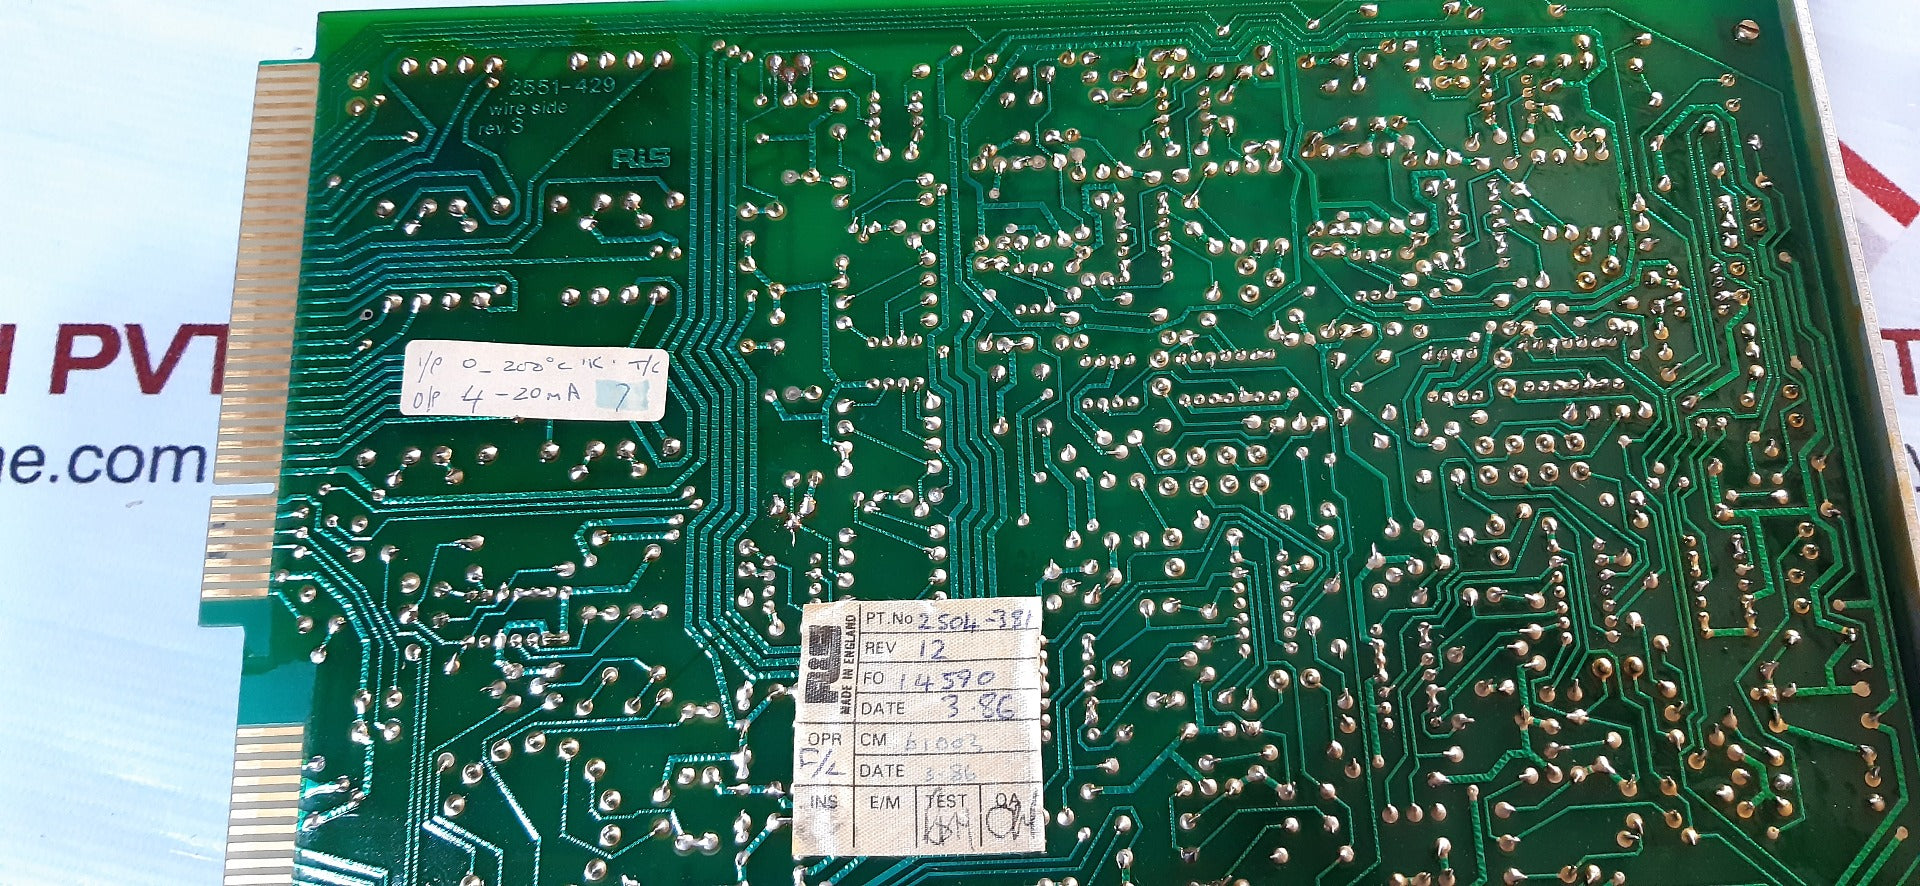 Rochester instruments 2504-381 pcb card 2551-429